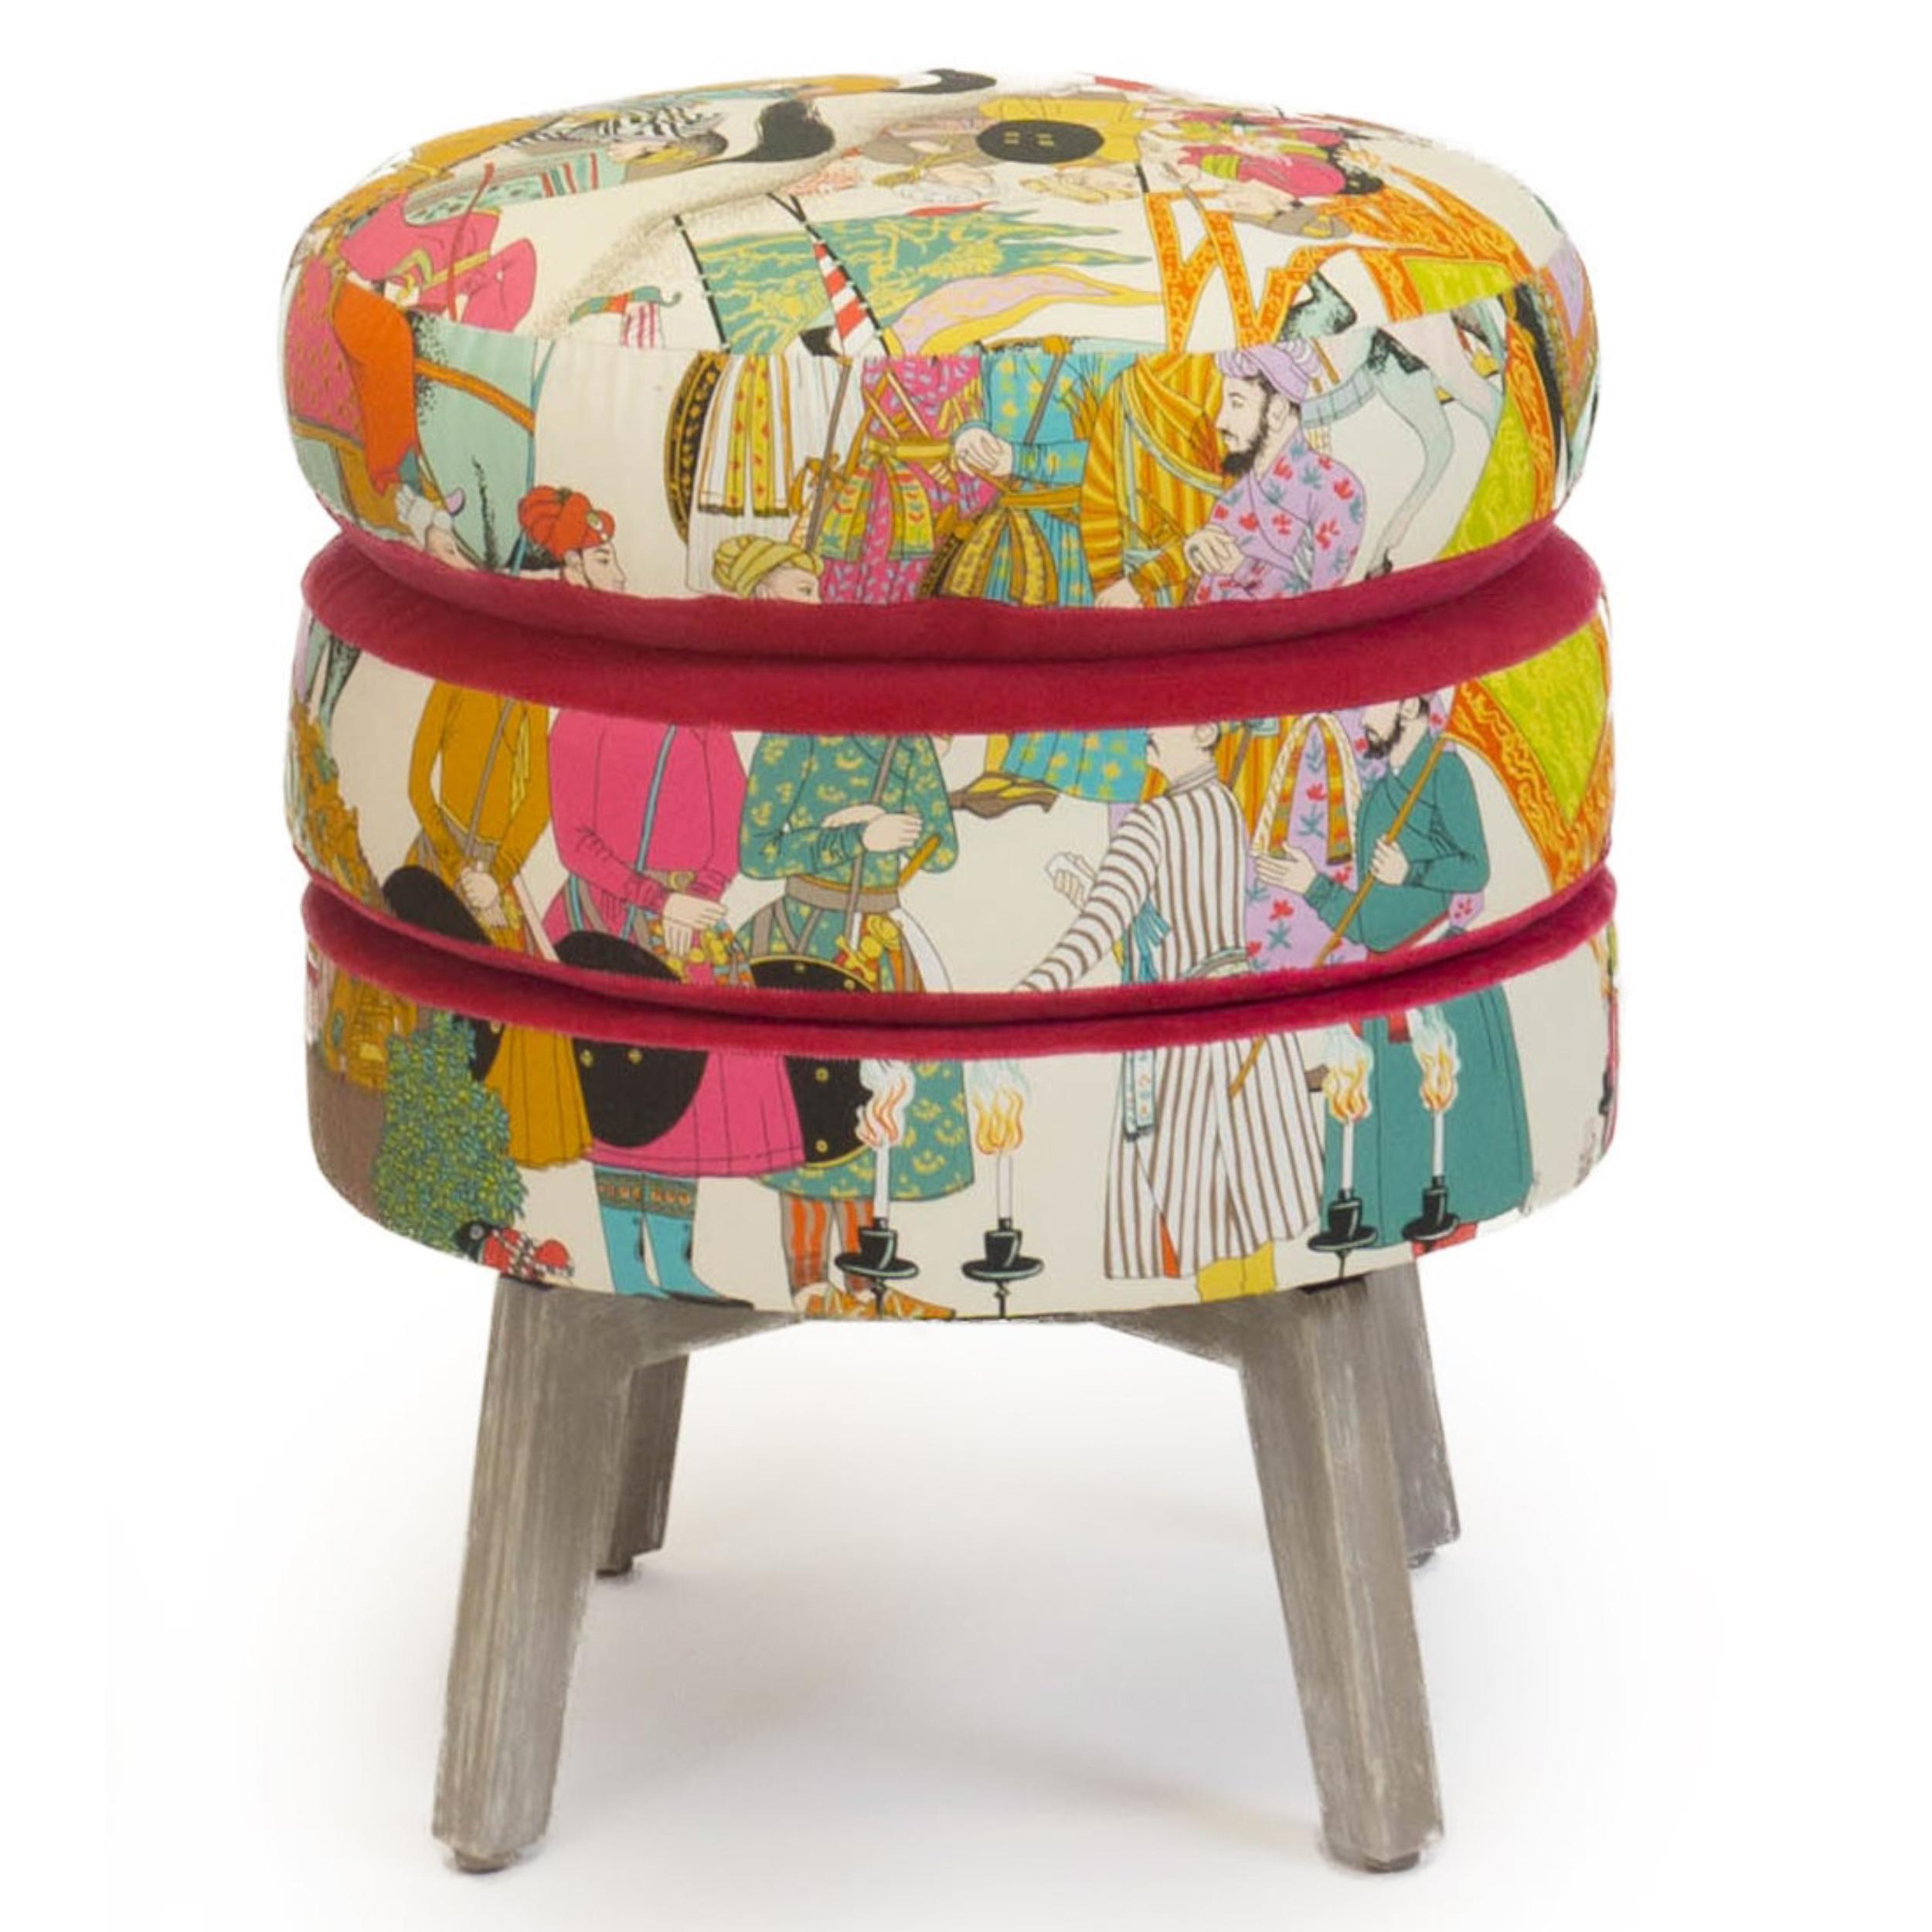 Our three layered ottoman stool features three layers of soft foam cushioning upholstered with an exotic toile fabric by Manuel Canovas with pink velvet outlining. The legs are maple wood with a hand brushed painted finish. This piece can be made in